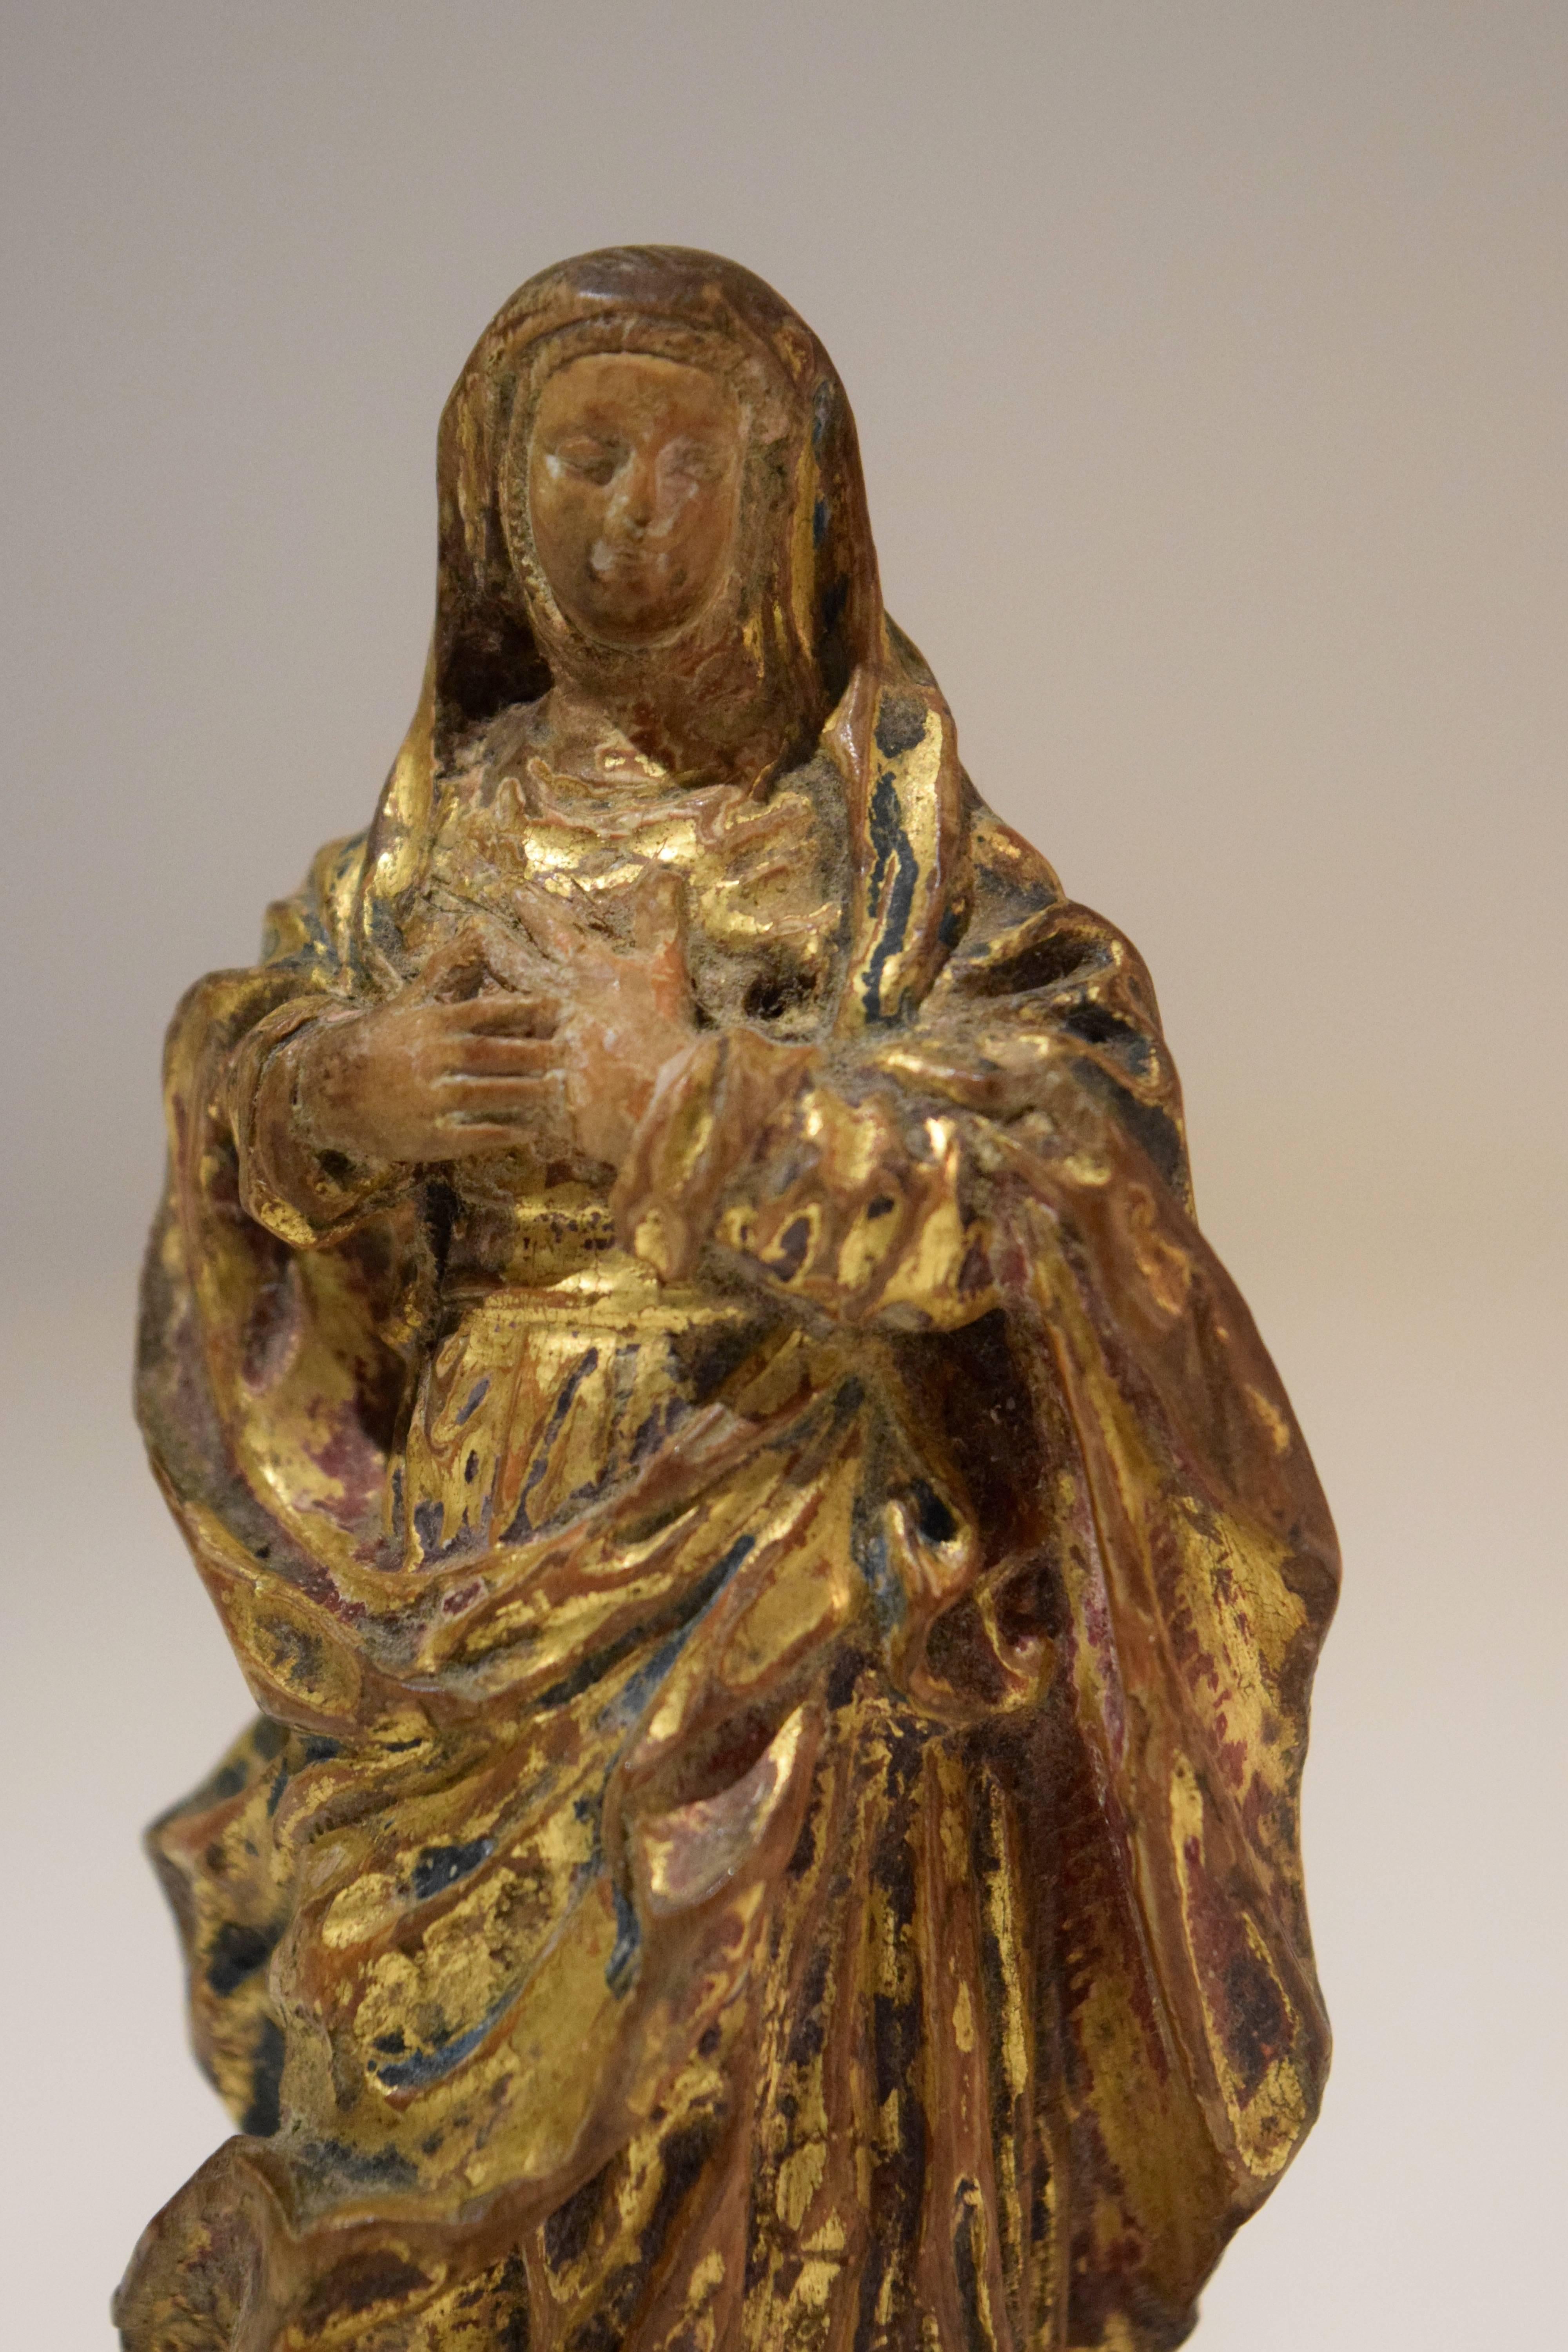 Gilt Early 18th-Century Devotional Sculpture of the Virgin